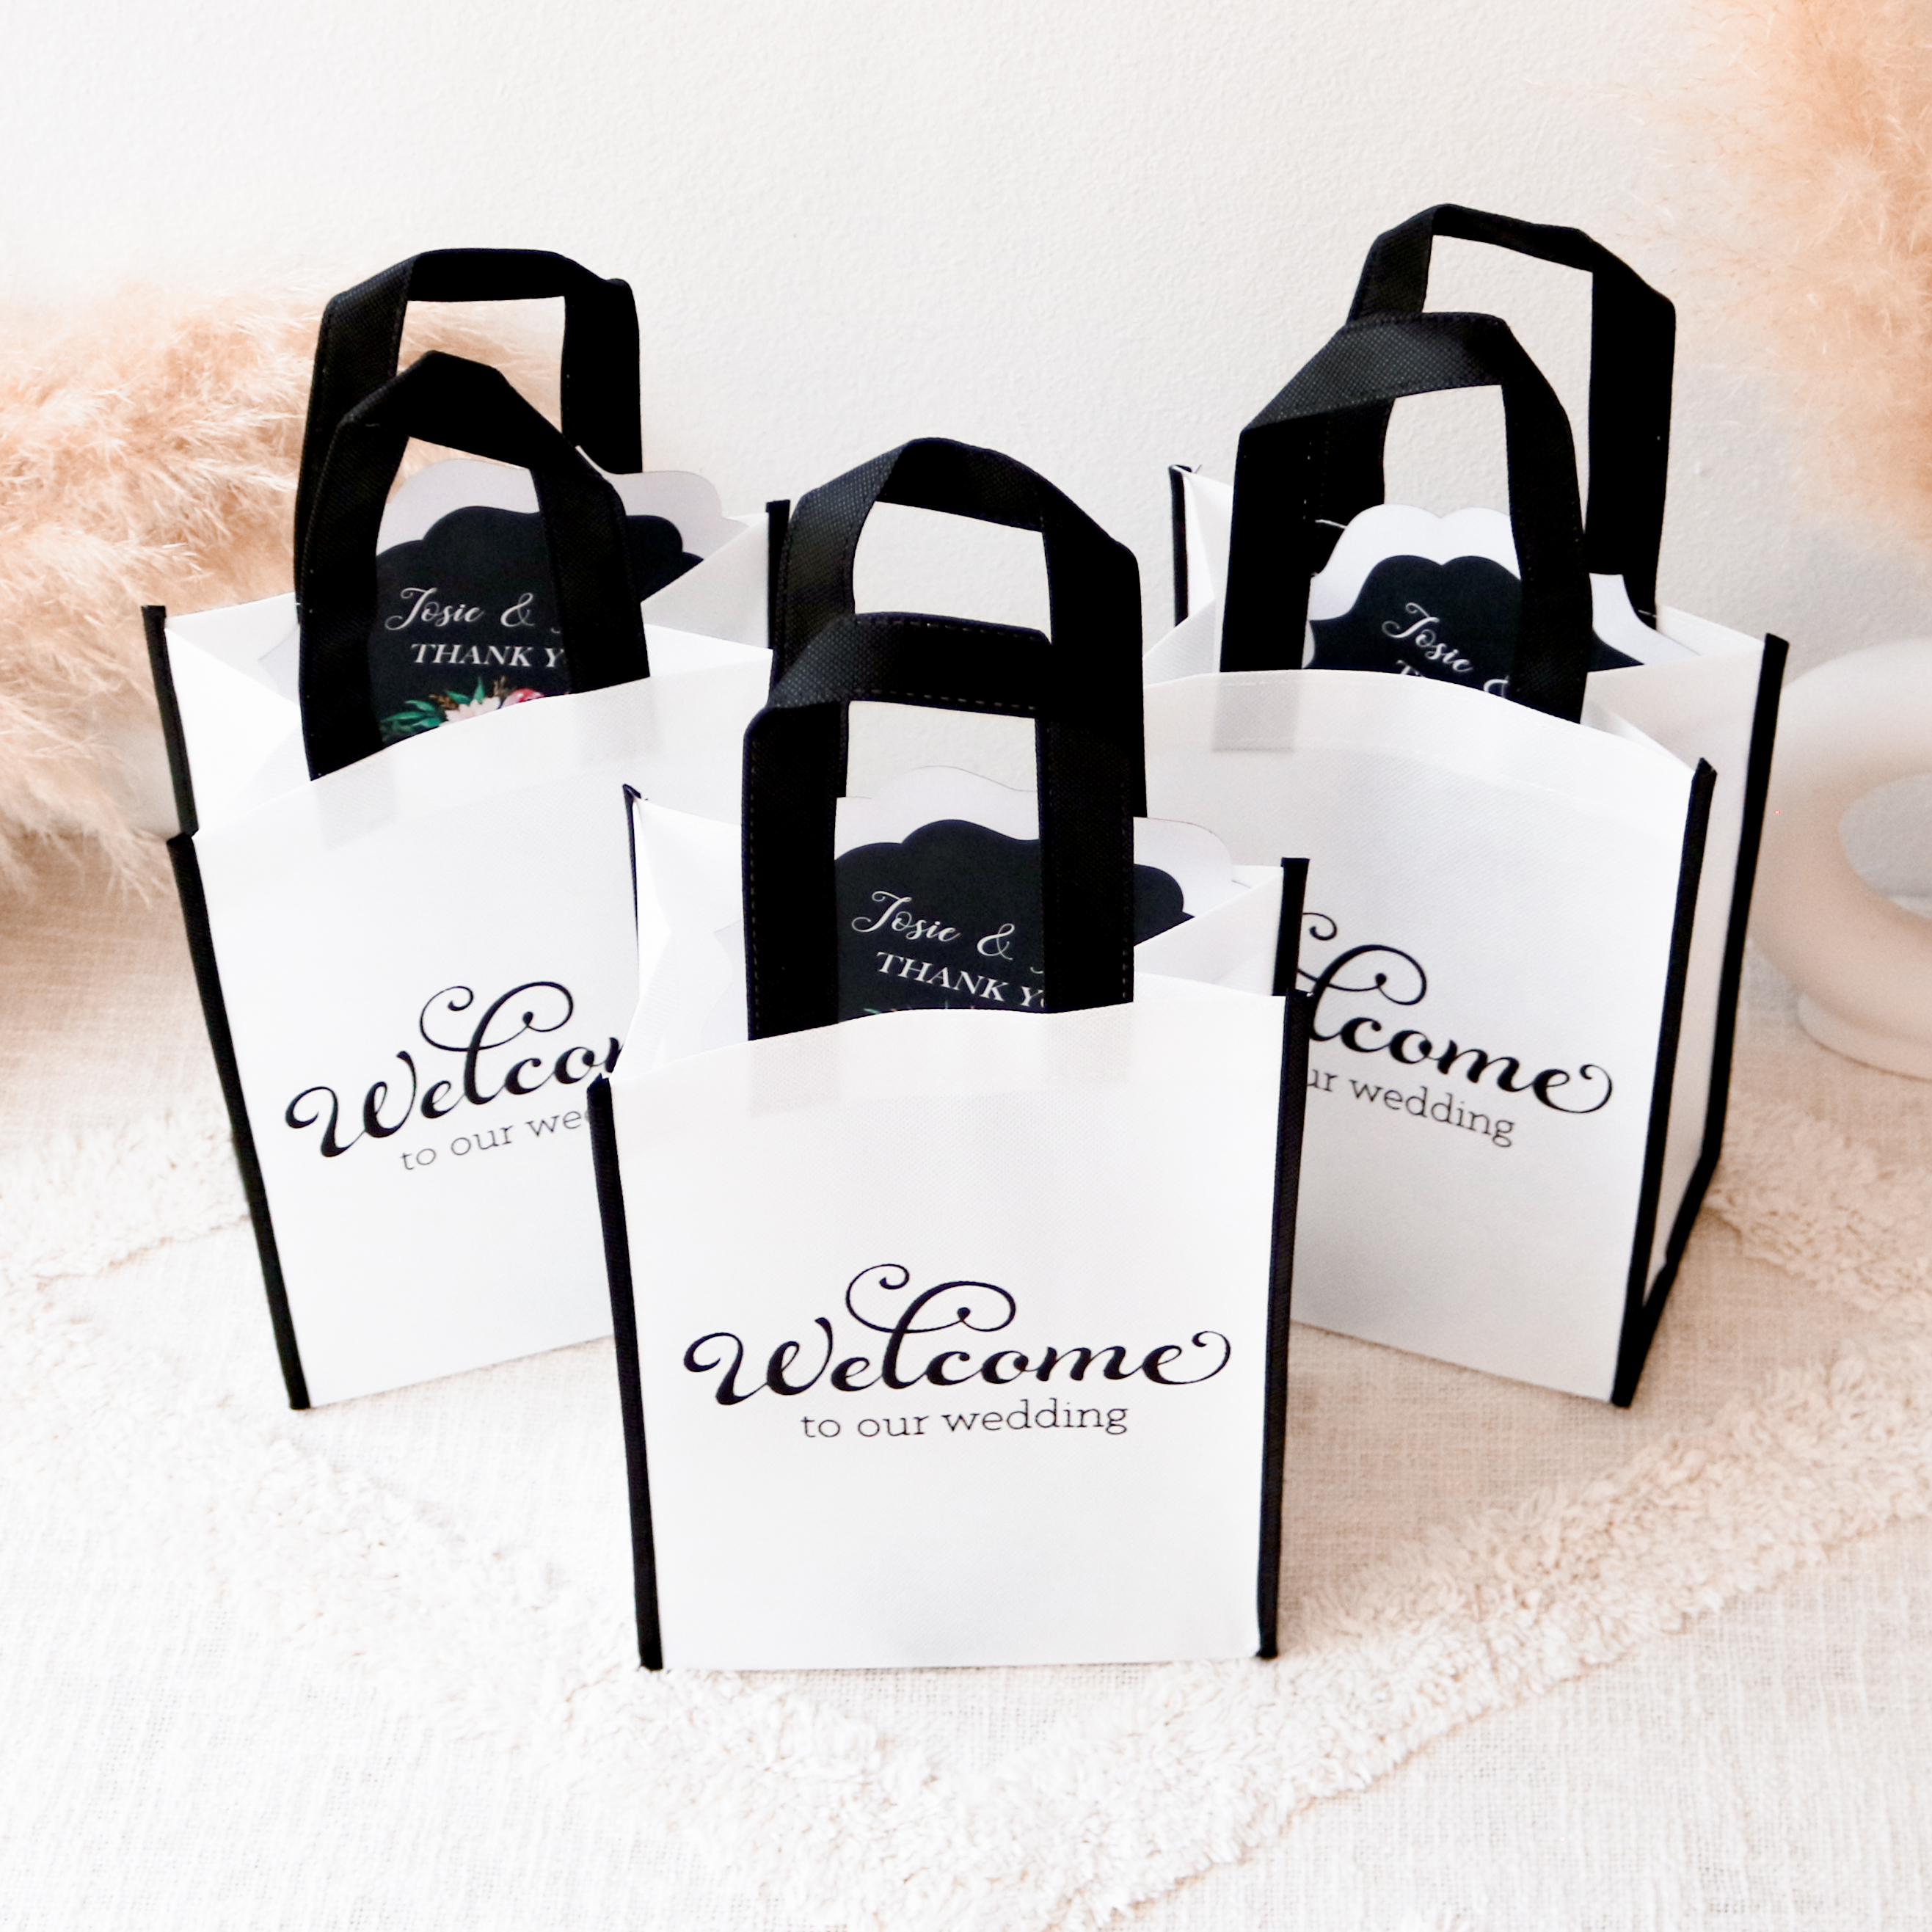 Michelle's Pa(i)ge | Fashion Blogger based in New York: WHAT TO INCLUDE IN  A WEDDING WELCOME BAG